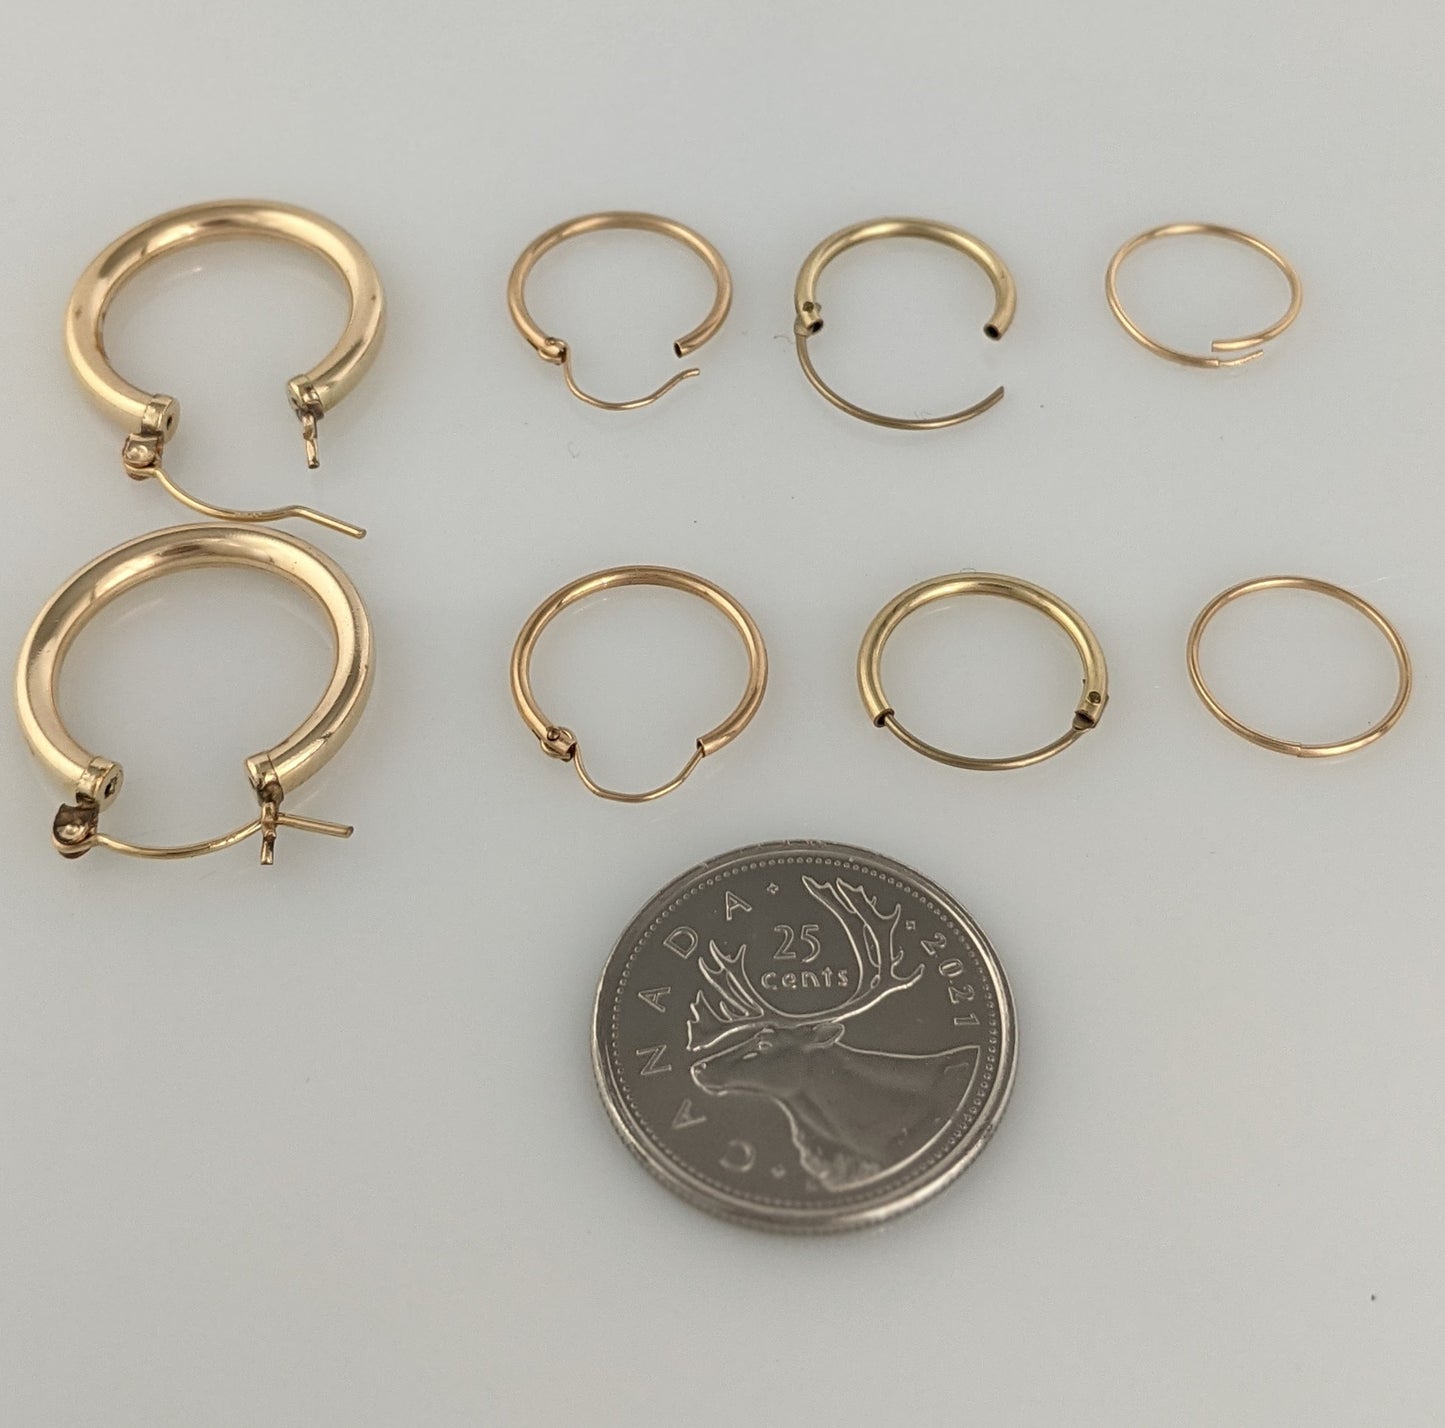 Machine fabricated hinged hoop earrings 14/20 Gold-Filled 15mm hollow tube lightweight economical GemRapture Jewellery